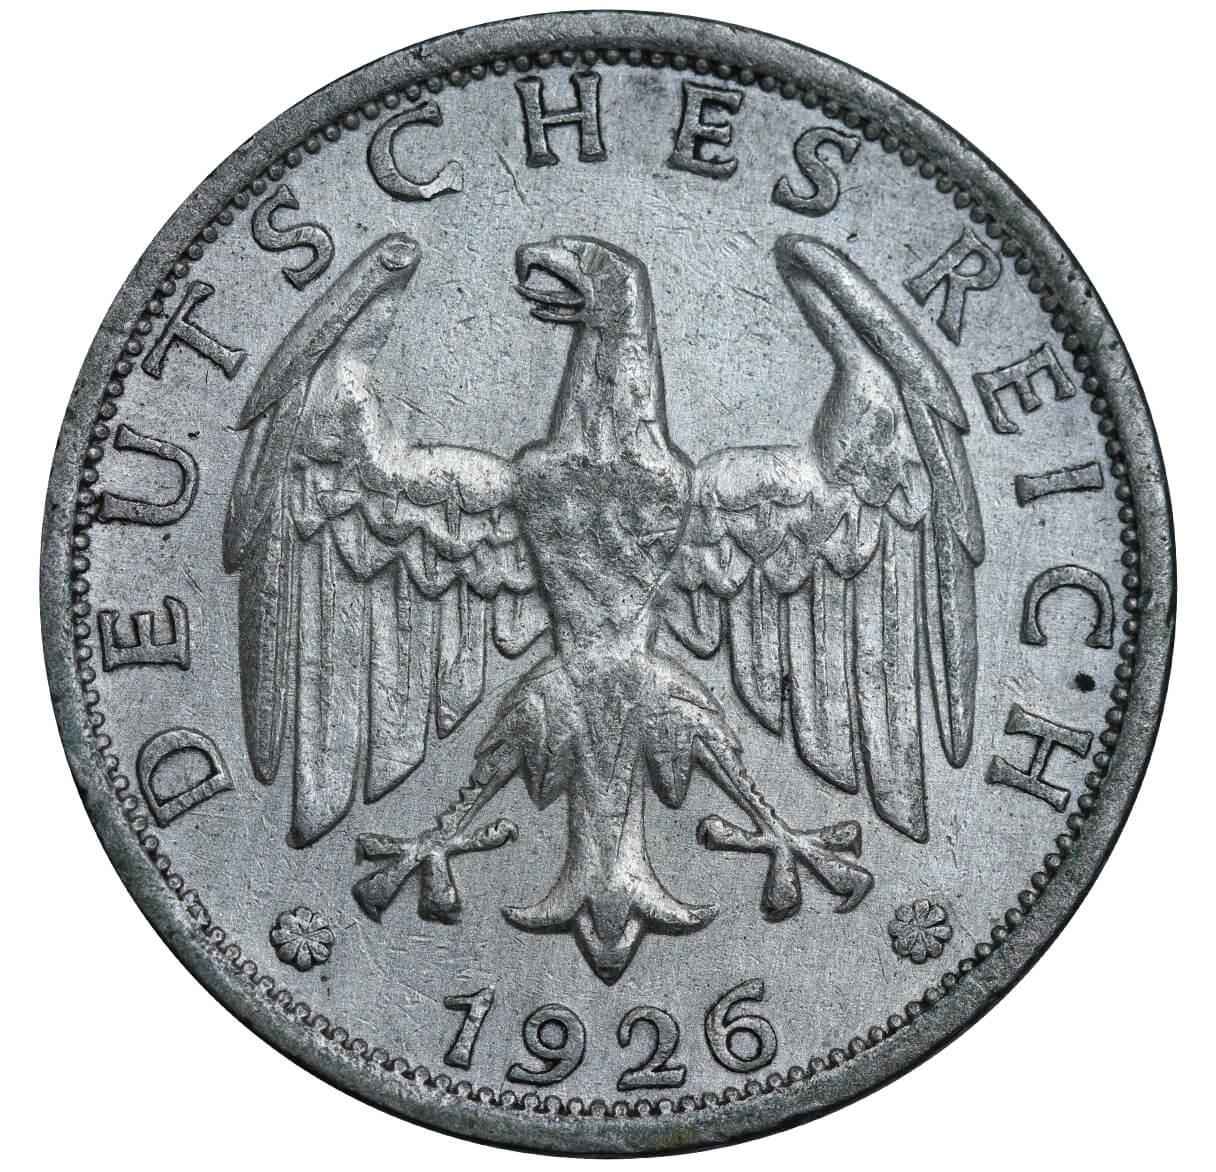 Germany, 2 Reichsmark, 1926 year, F - Image 3 of 3